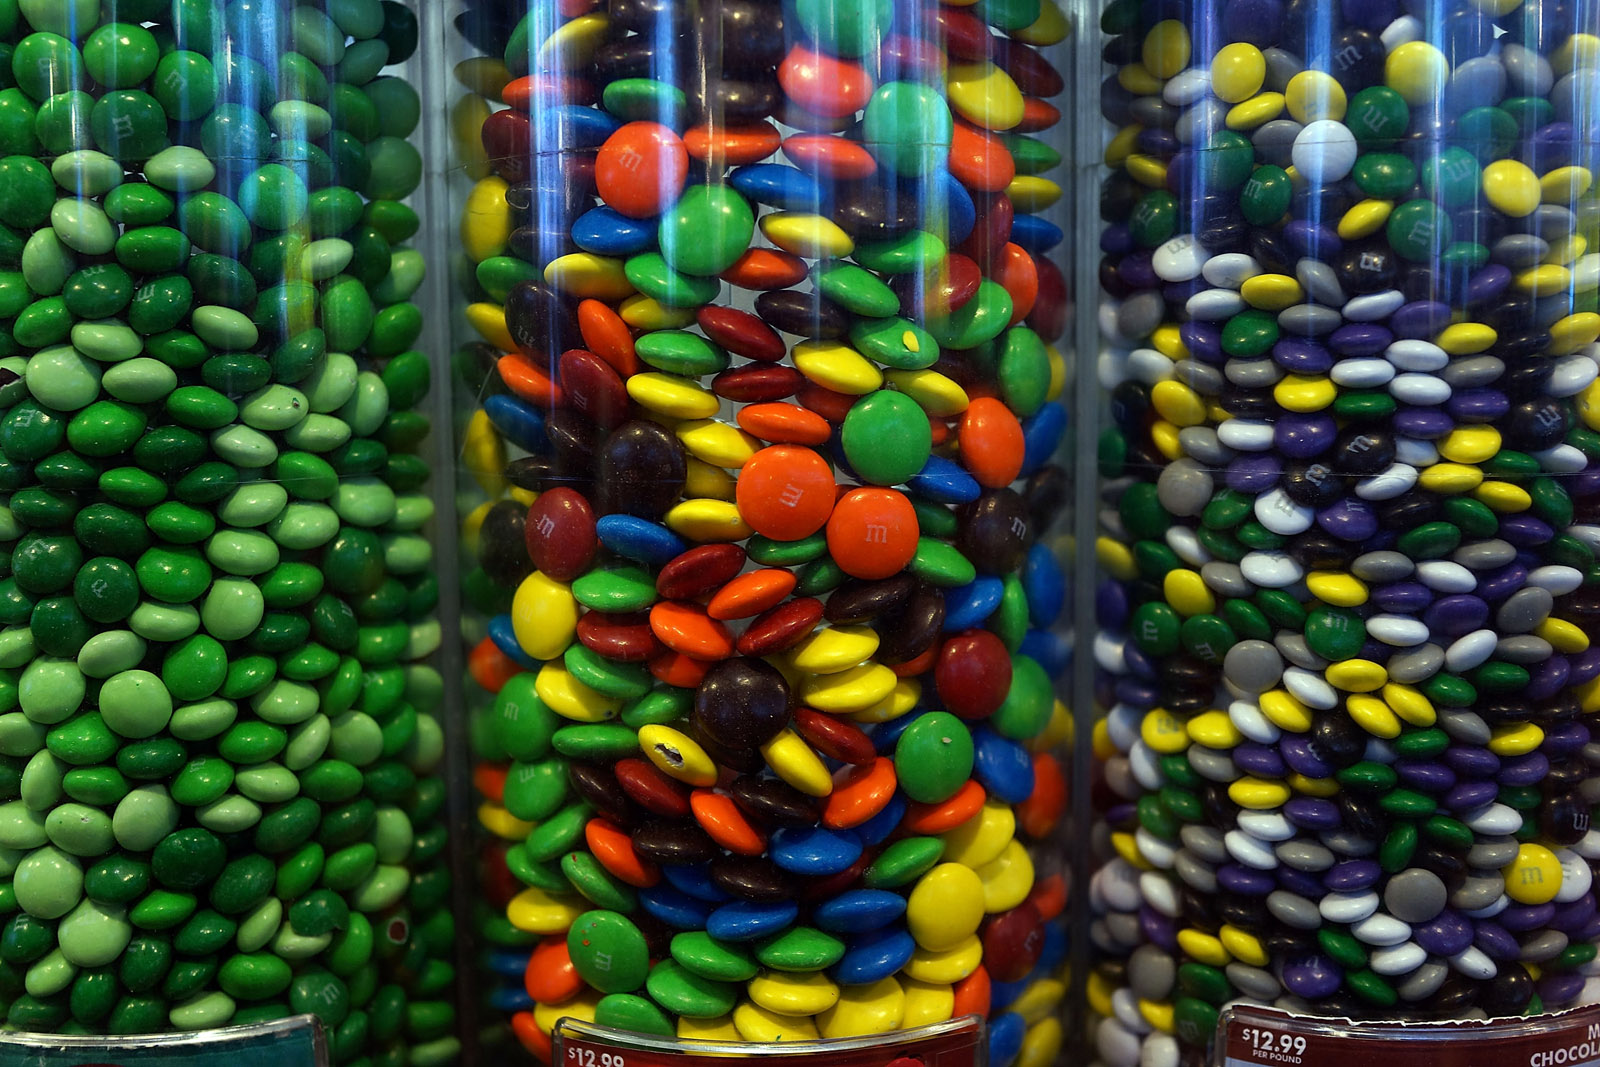 NEW YORK, NY - JULY 24:  M&amp;M's are viewed in the M&amp;M store in Times Square on July 24, 2014 in New York City. With the increase in cocoa prices, Mars Chocolate North America, the maker of Snickers and M&amp;M's, announced an average price increase of 7 percent this week for their chocolate products.  (Photo by Spencer Platt/Getty Images)